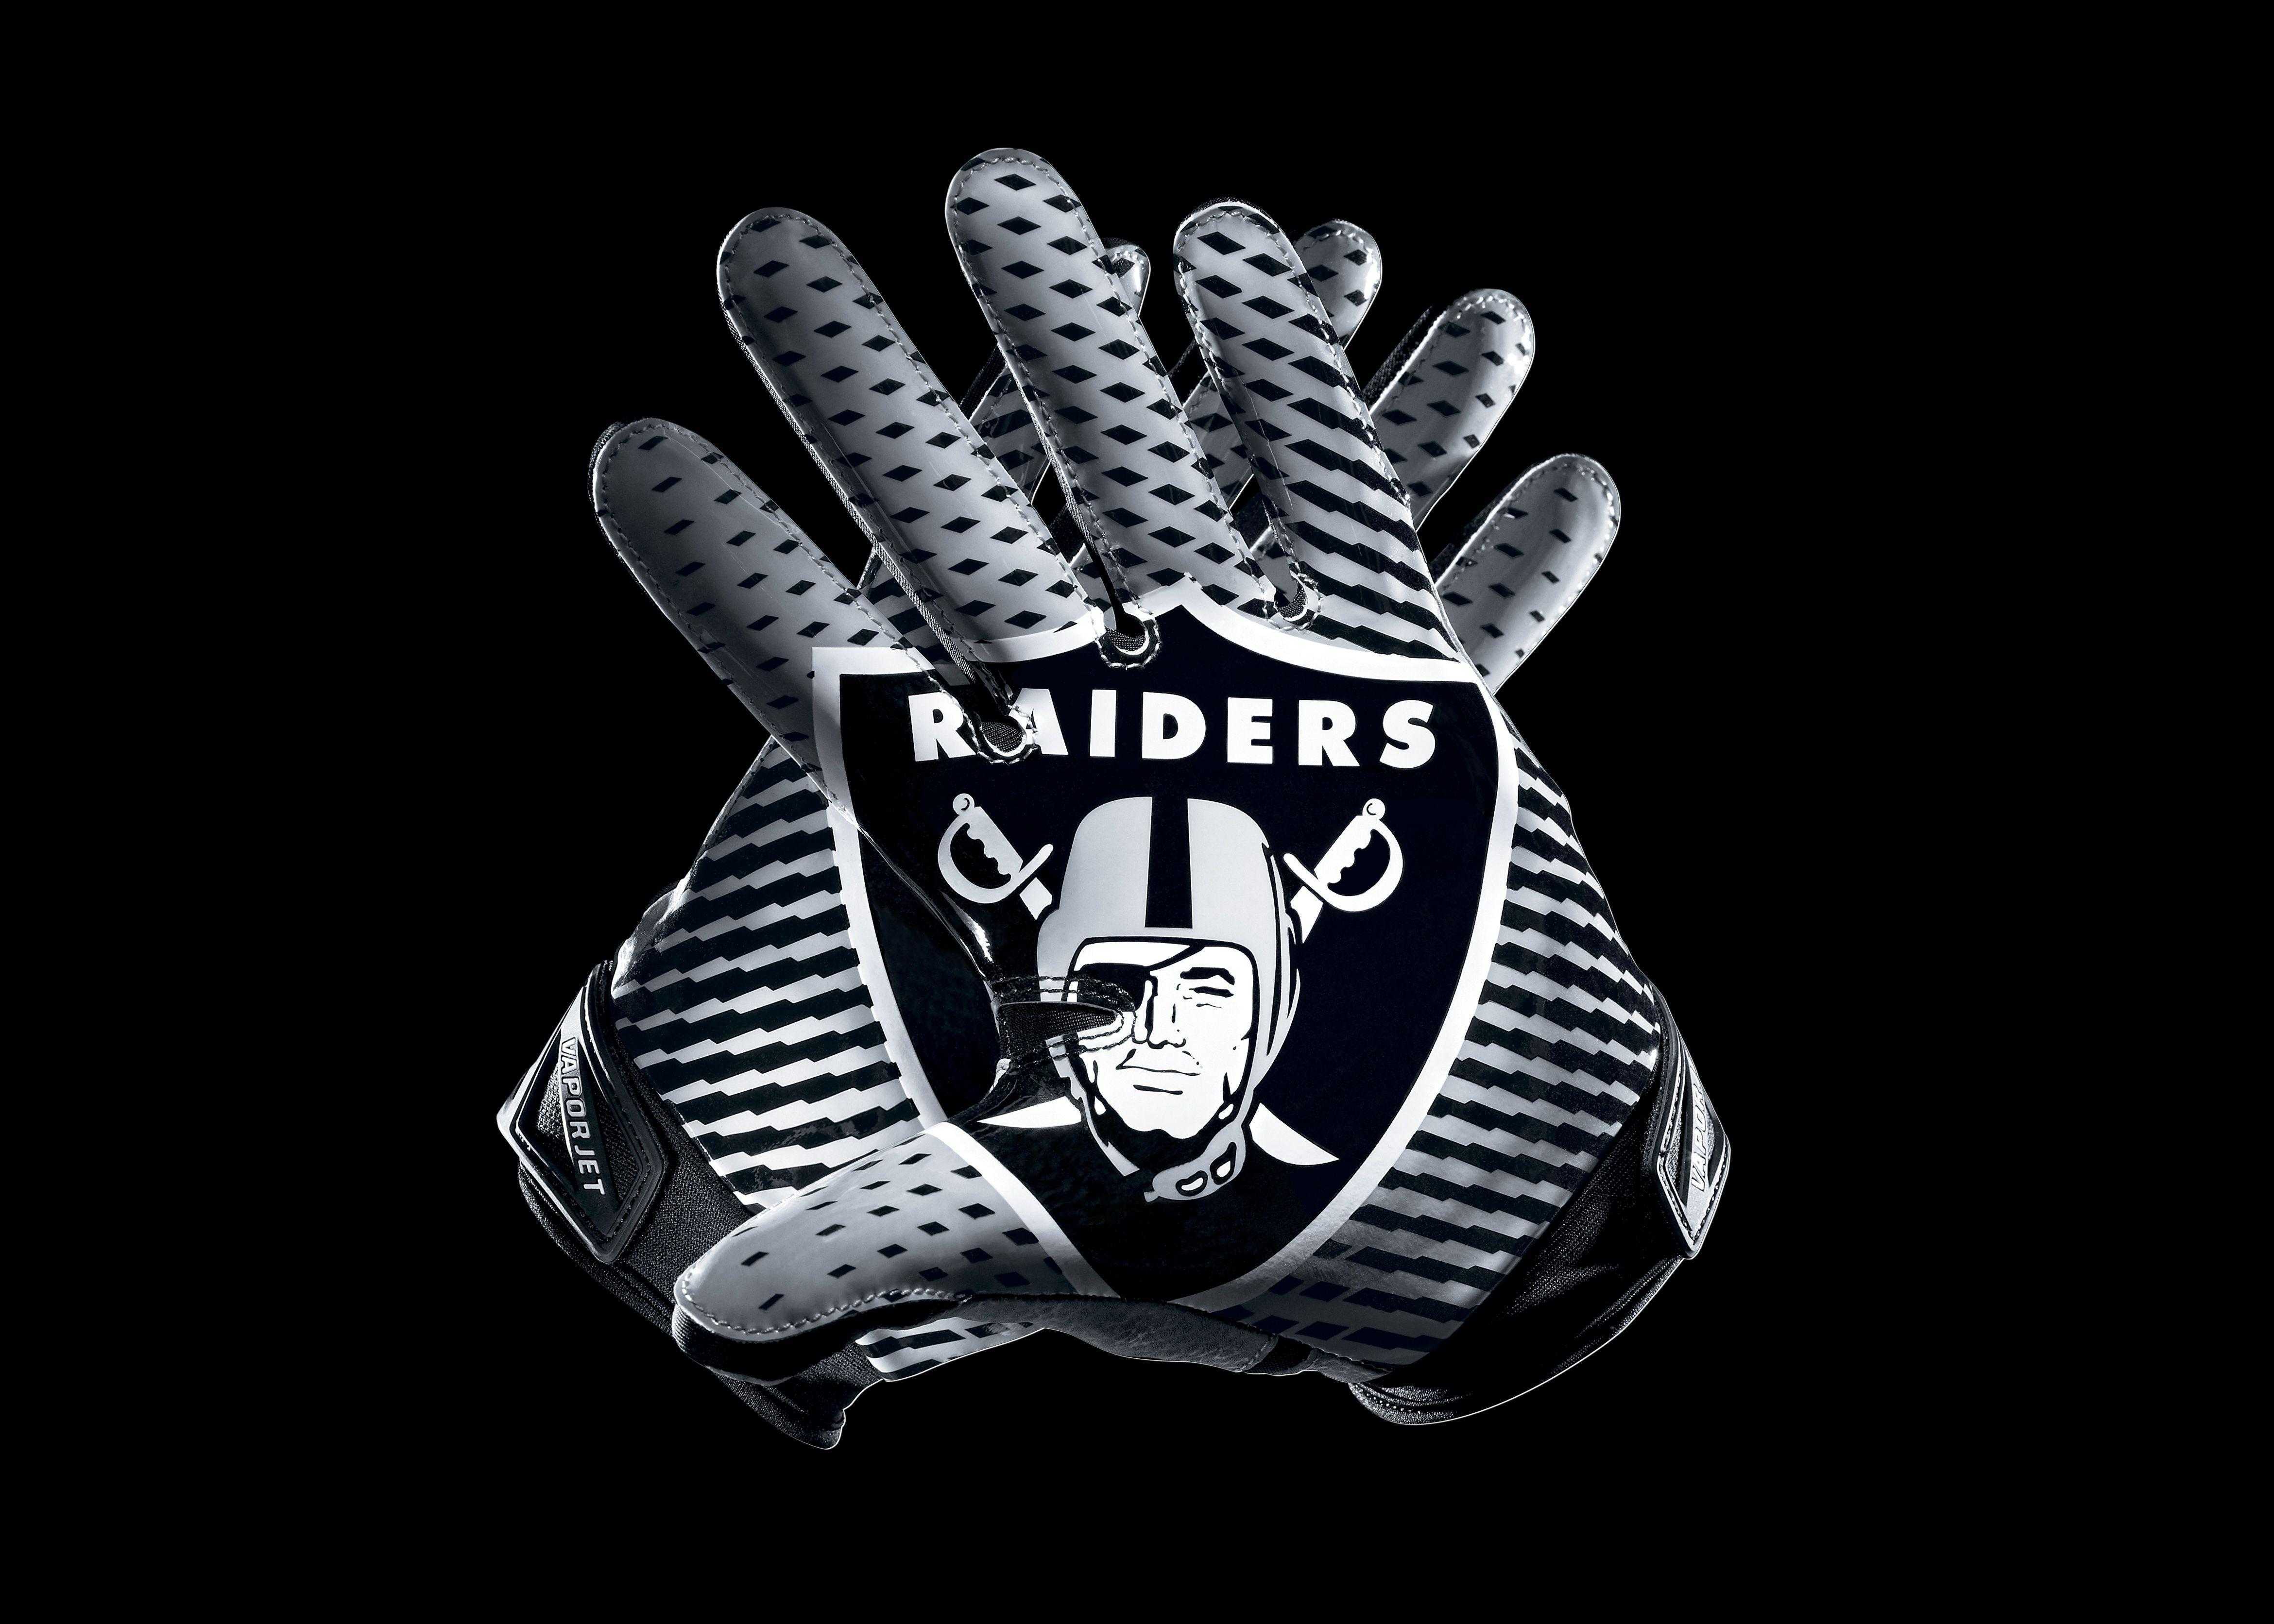 Oakland Raiders Wallpaper Computer High Quality For iPhone HD Mobile